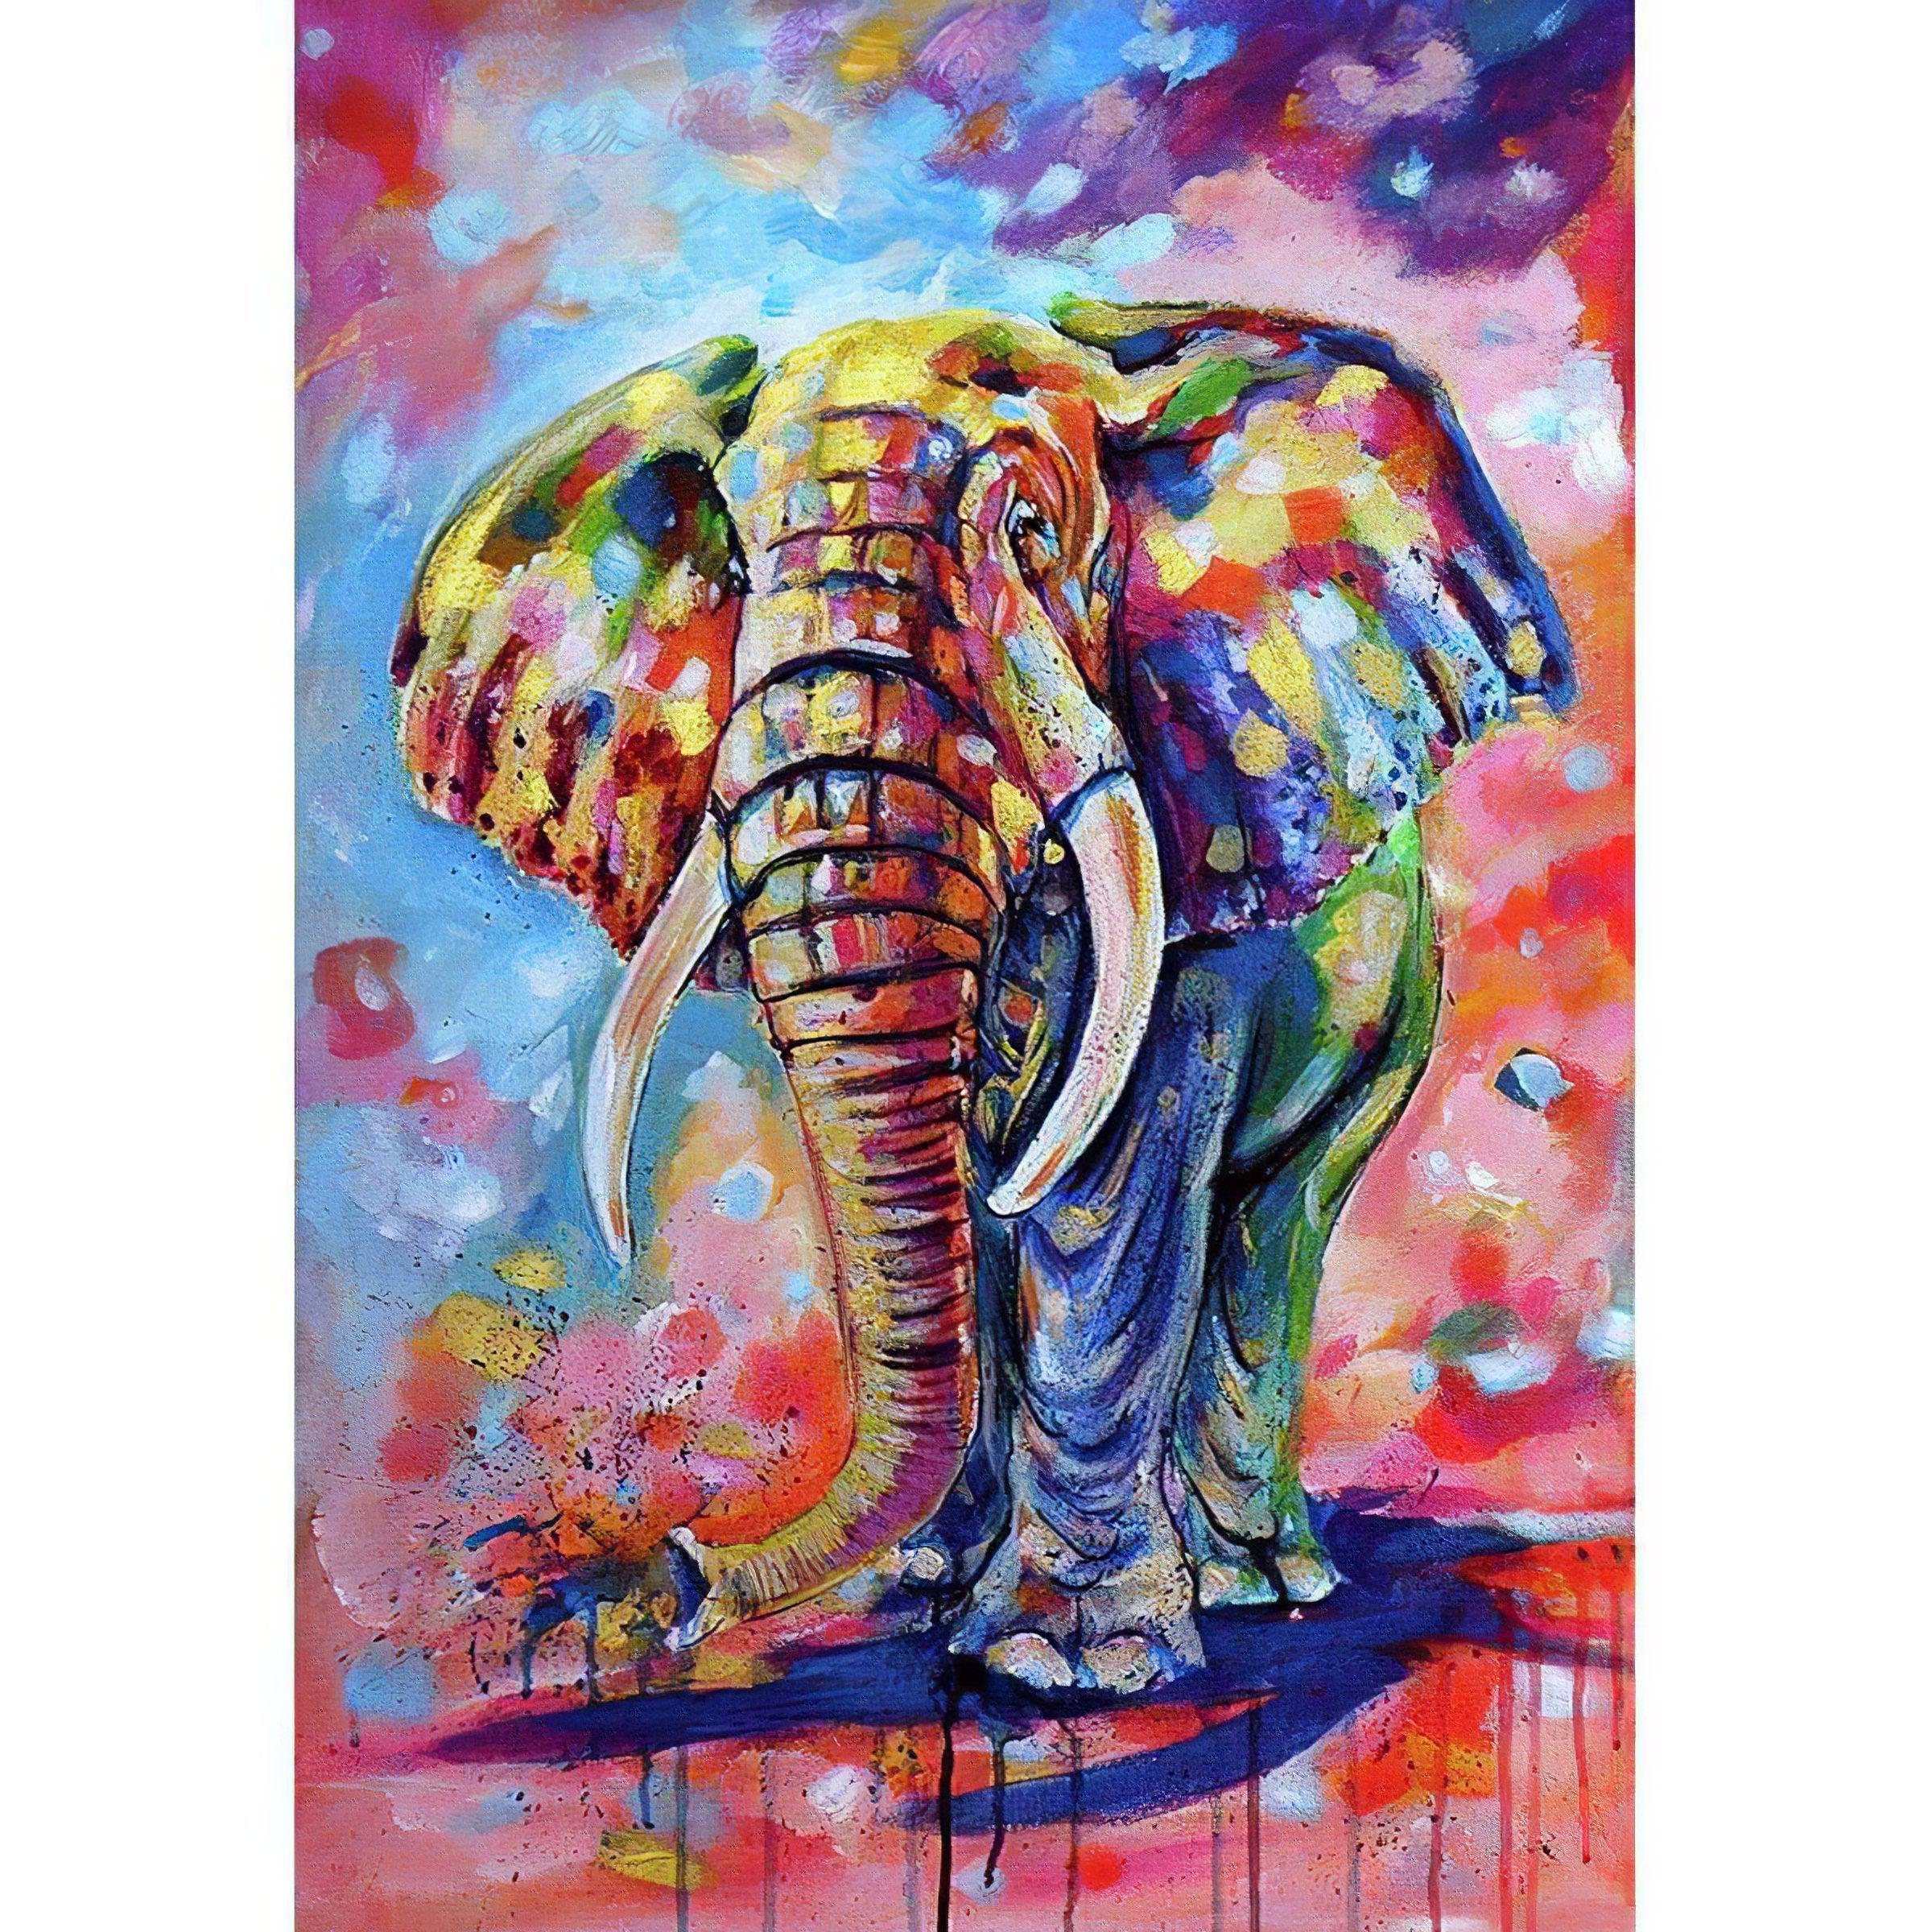 Behold the majesty of a colored elephant, adorned in a spectrum of hues.Colored Elephant - Diamondartlove